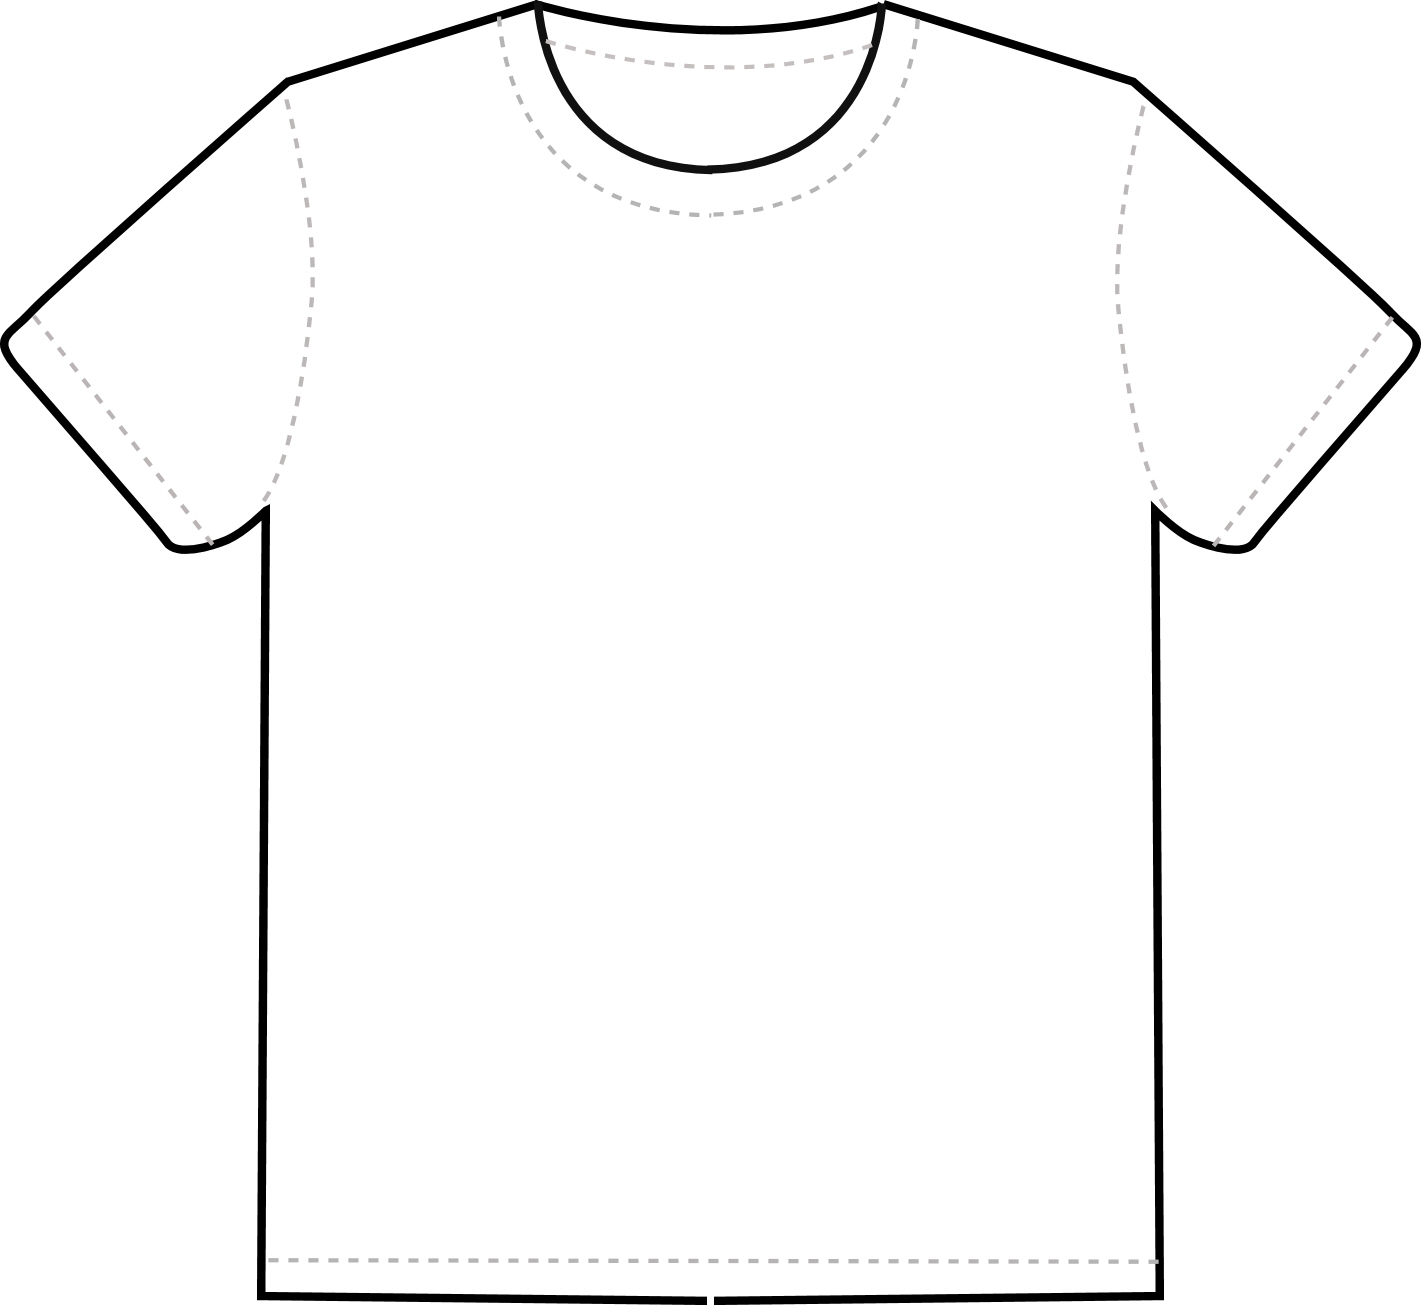 T Shirt Outline Template: A Helpful Tool for Creative Design Projects